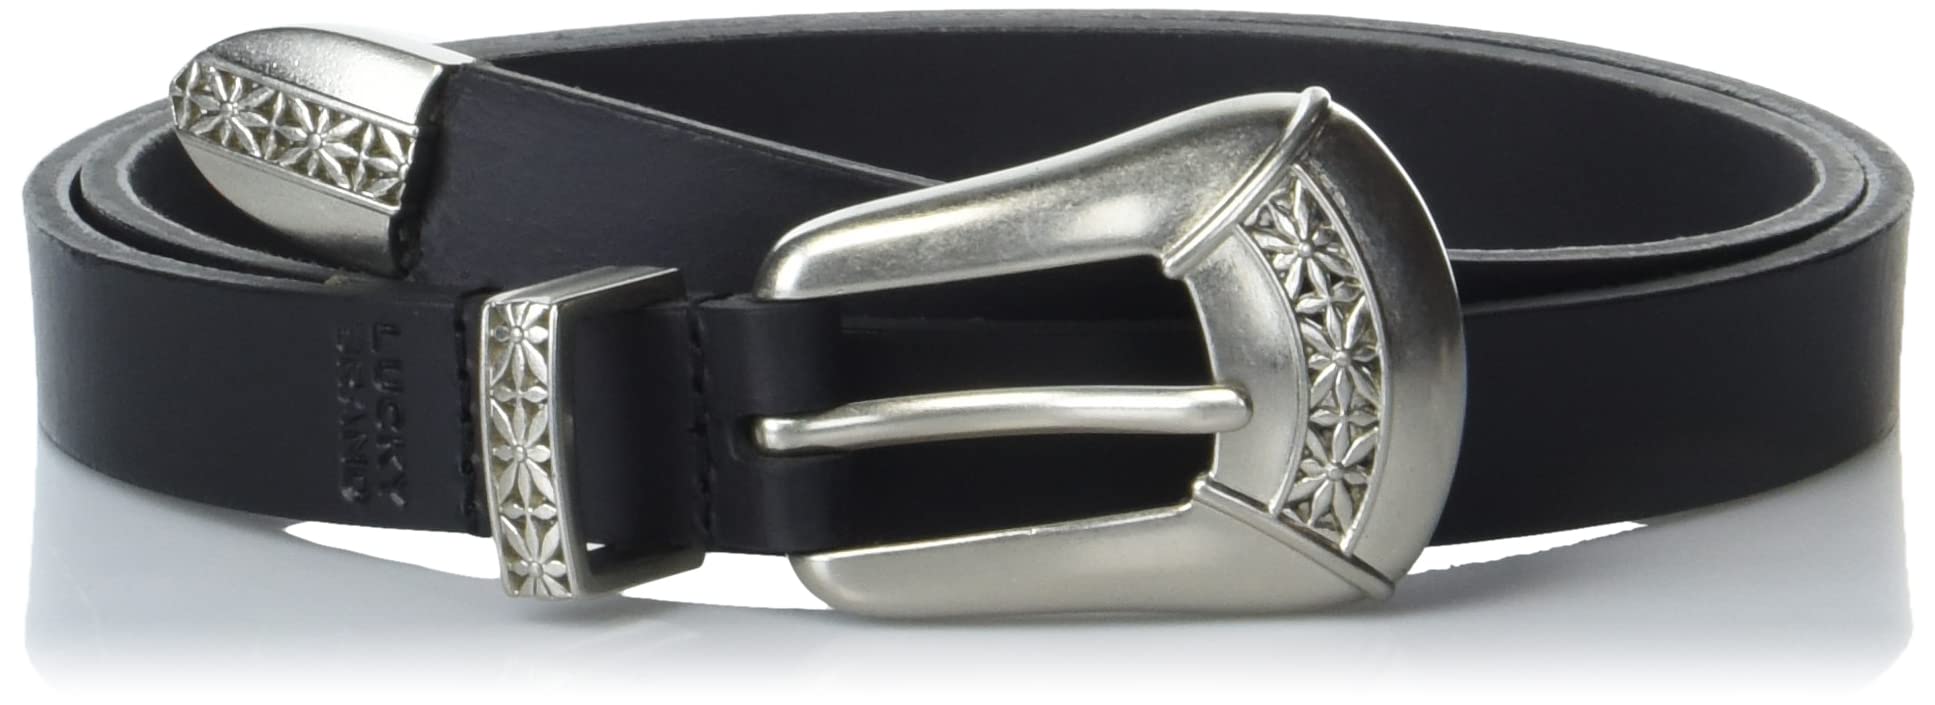 Lucky Brand Women's Leather Belt with Western Buckle Set